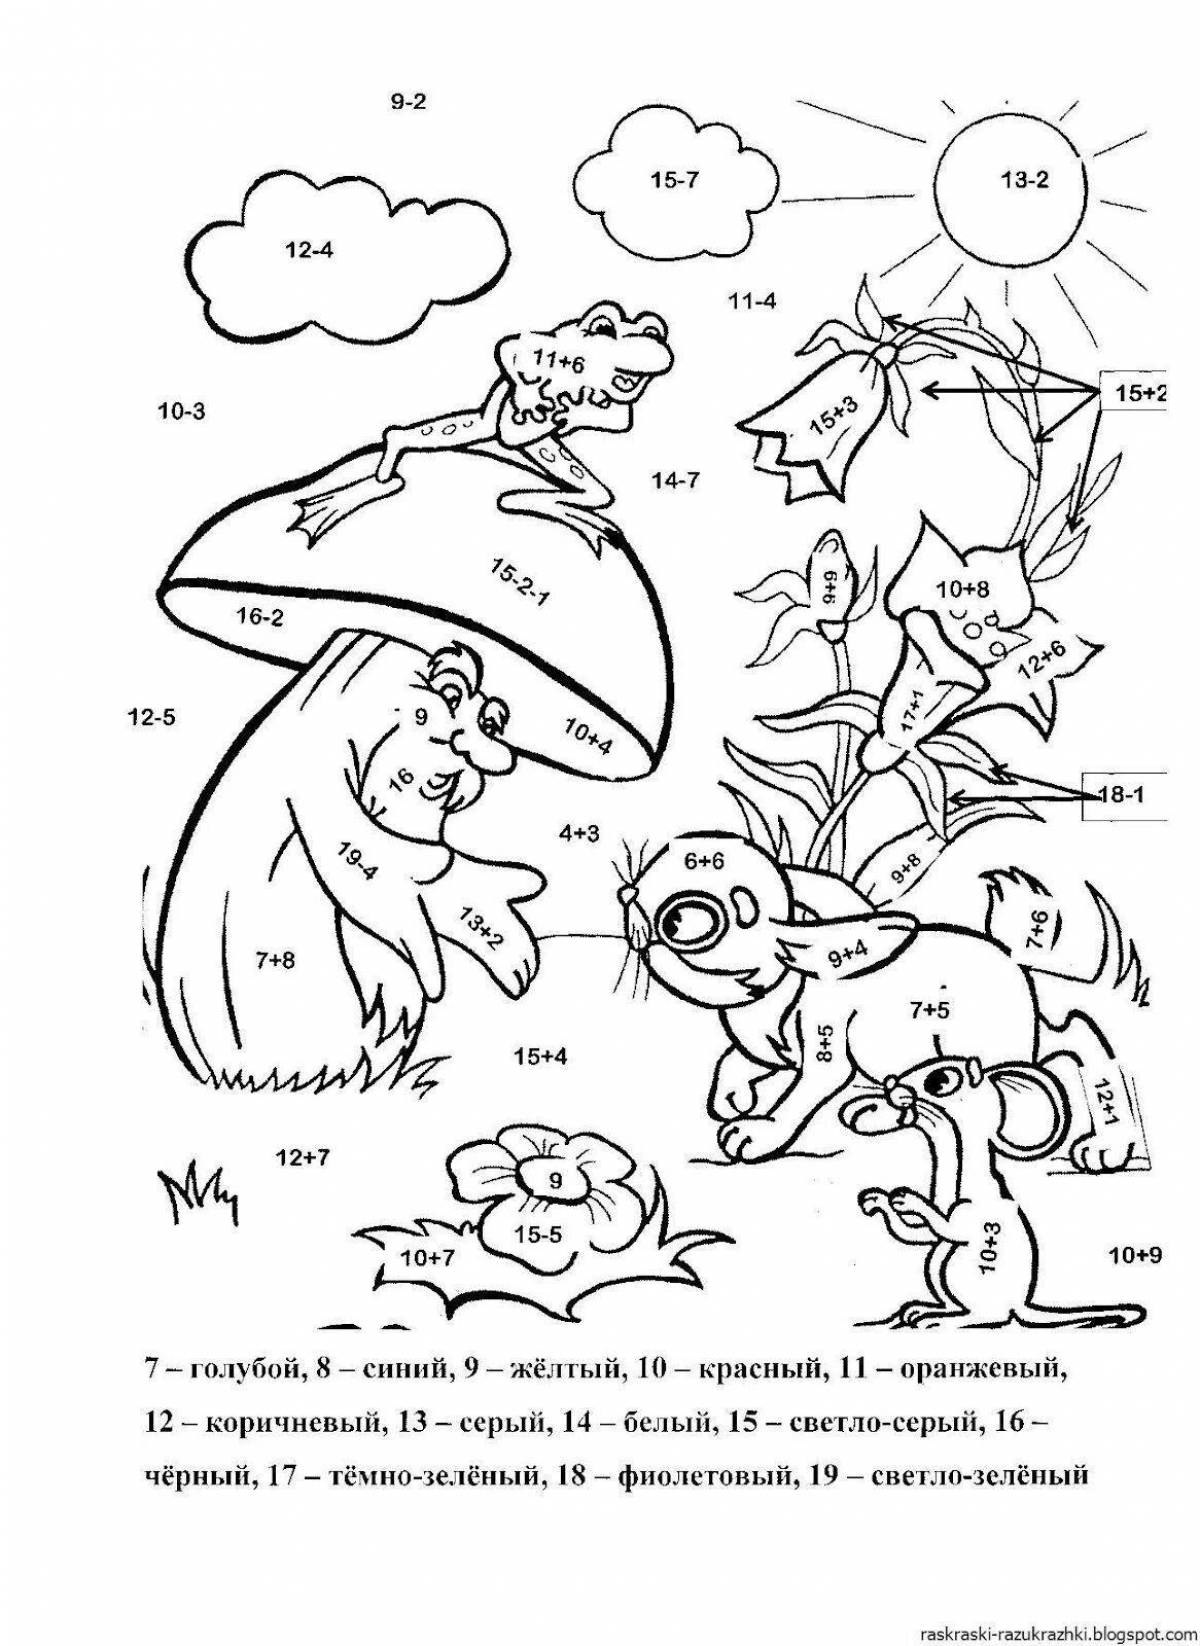 Examples of colorful coloring pages with mi 1 class